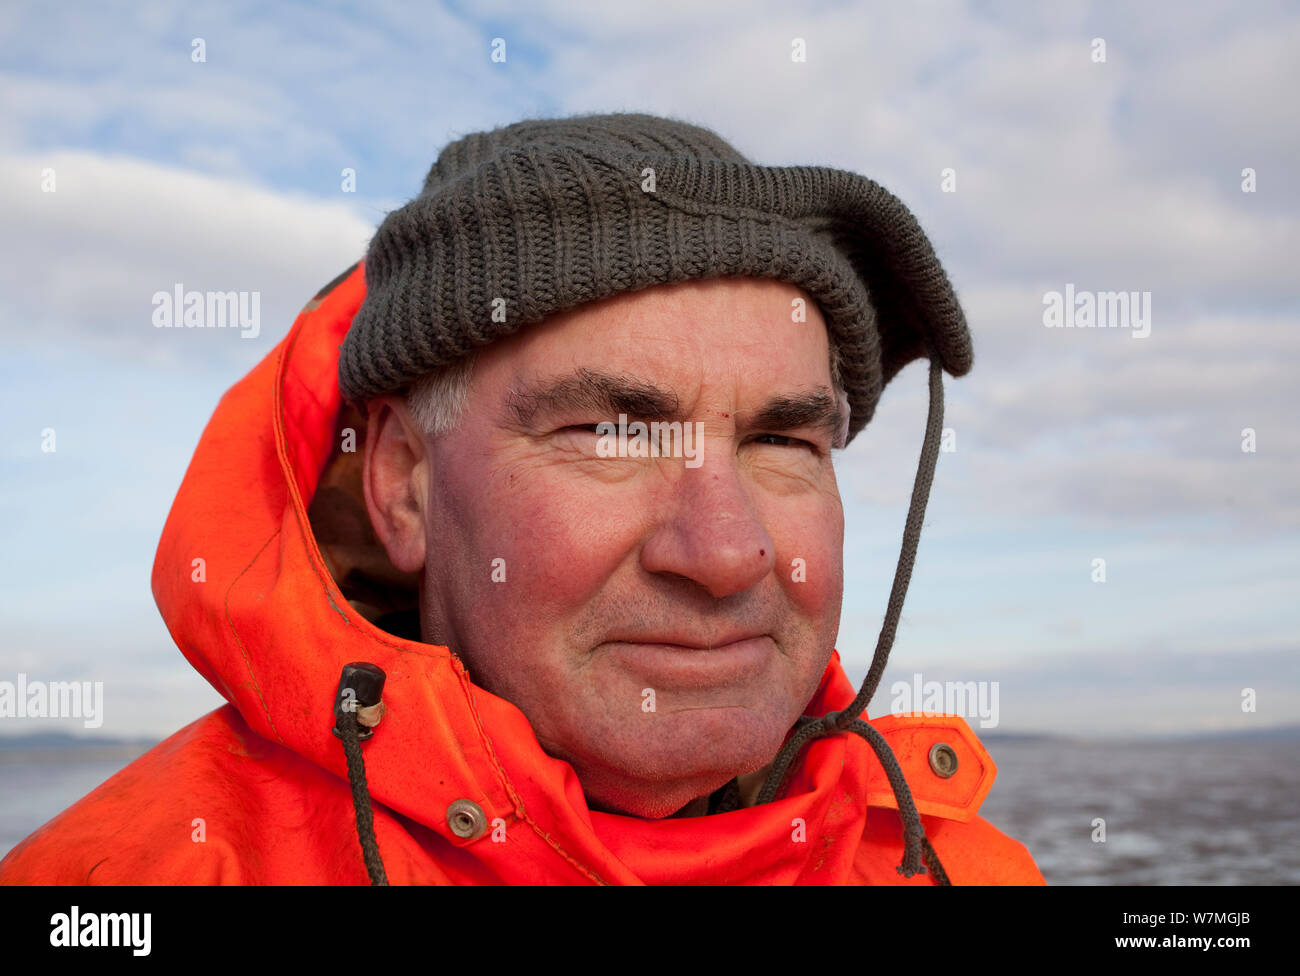 Portrait of a cockle fishermen, Morecambe Bay, Cumbria, England, UK, February 2012. Model released. 2020VISION Exhibition. Stock Photo